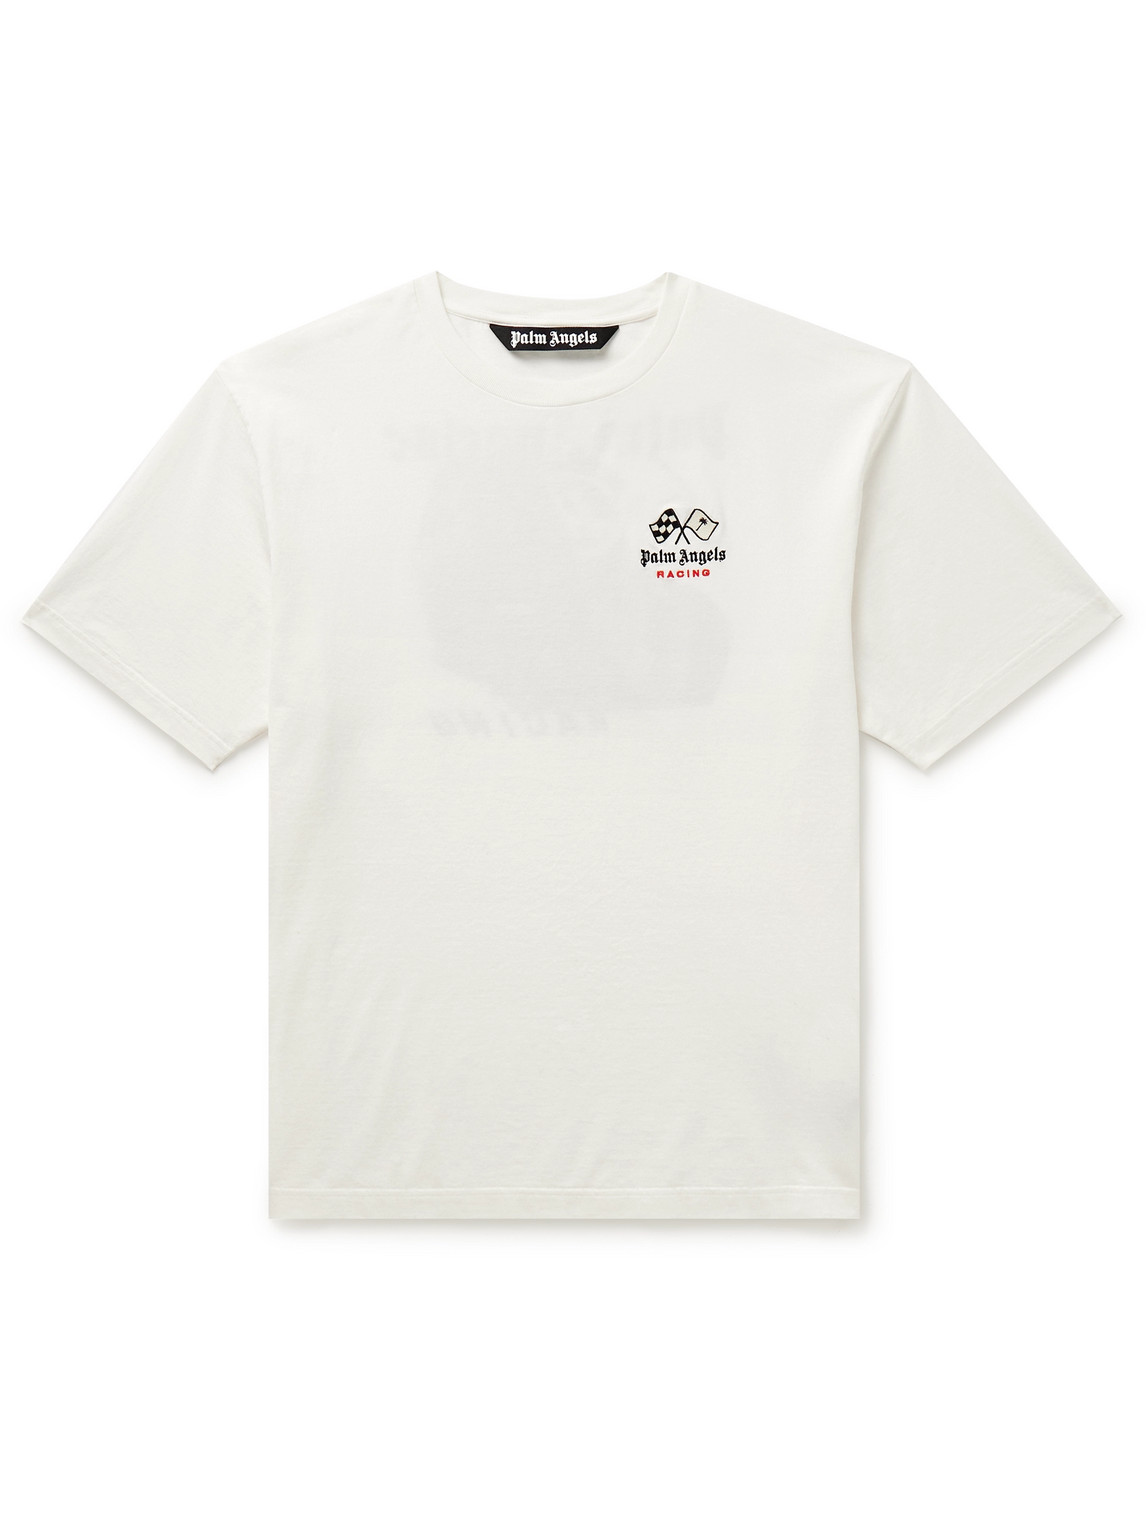 Palm Angels - Racing Logo-Embroidered Printed Cotton-Jersey T-Shirt - Men - White - L von Palm Angels